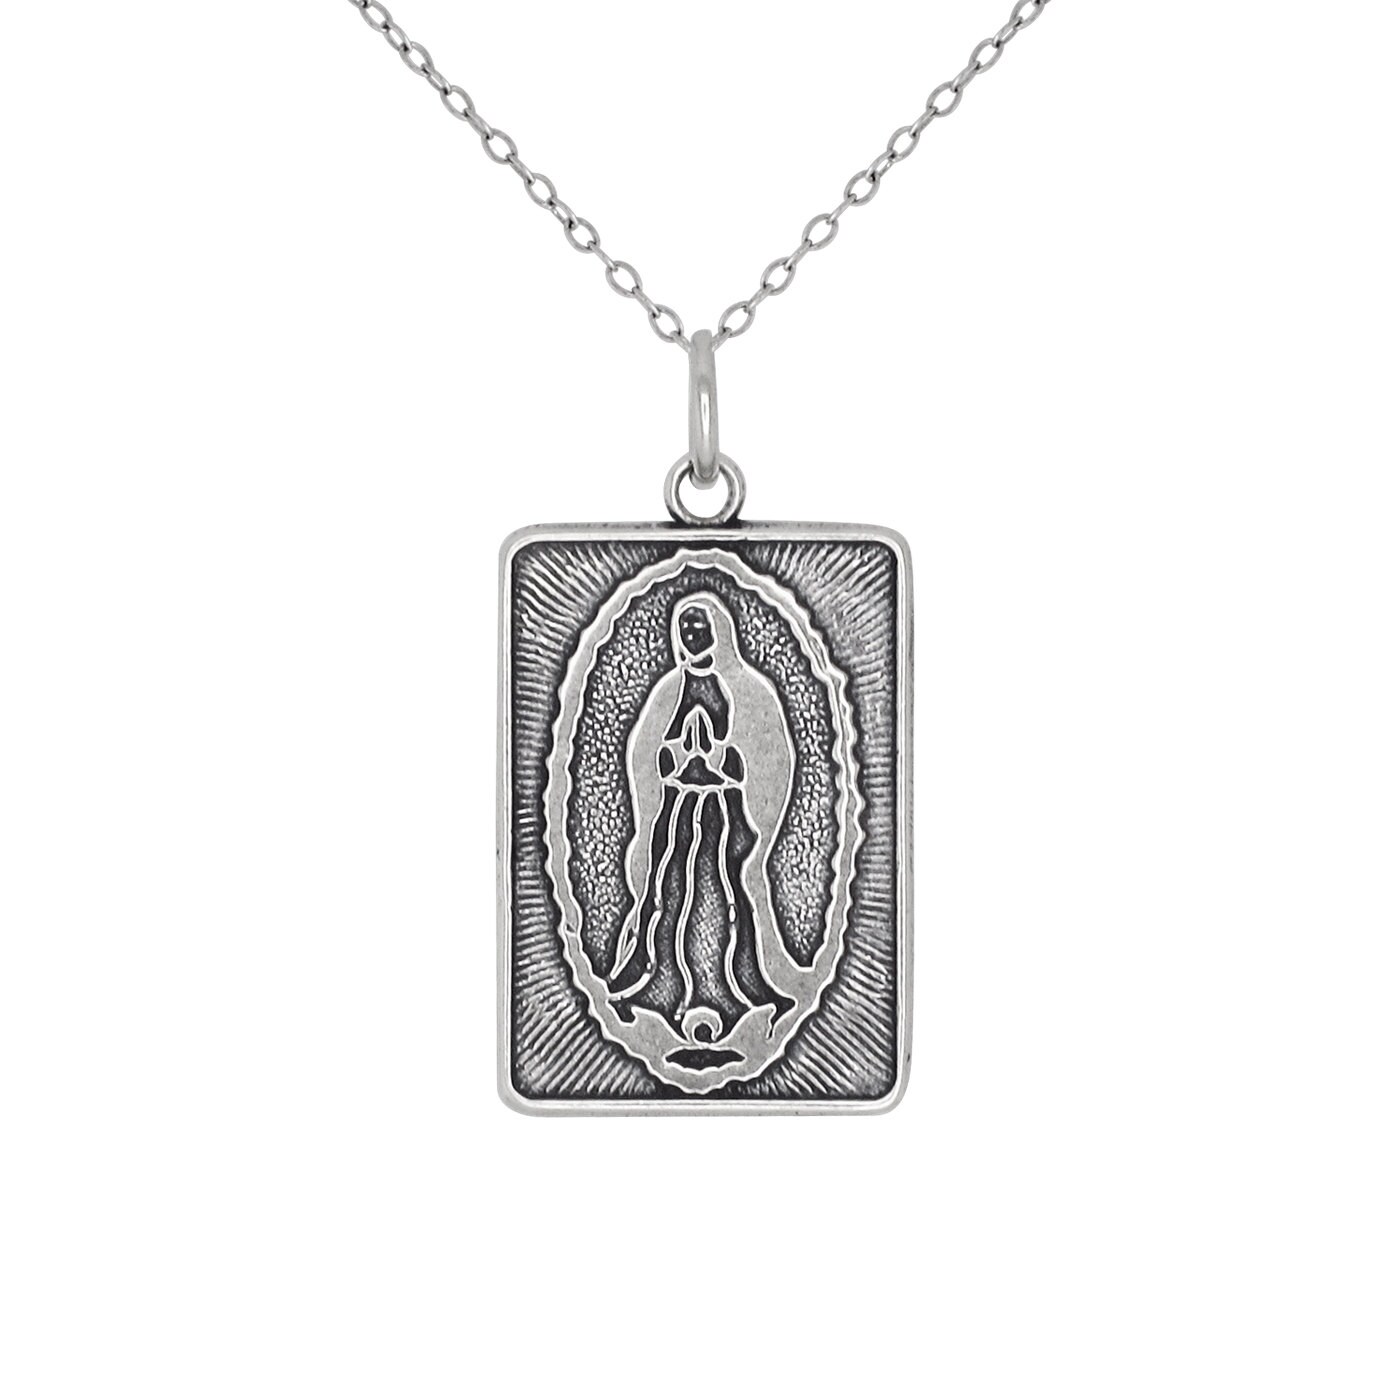 Sterling Silver .925 Virgin Mary Medal Charm Pendant Necklace